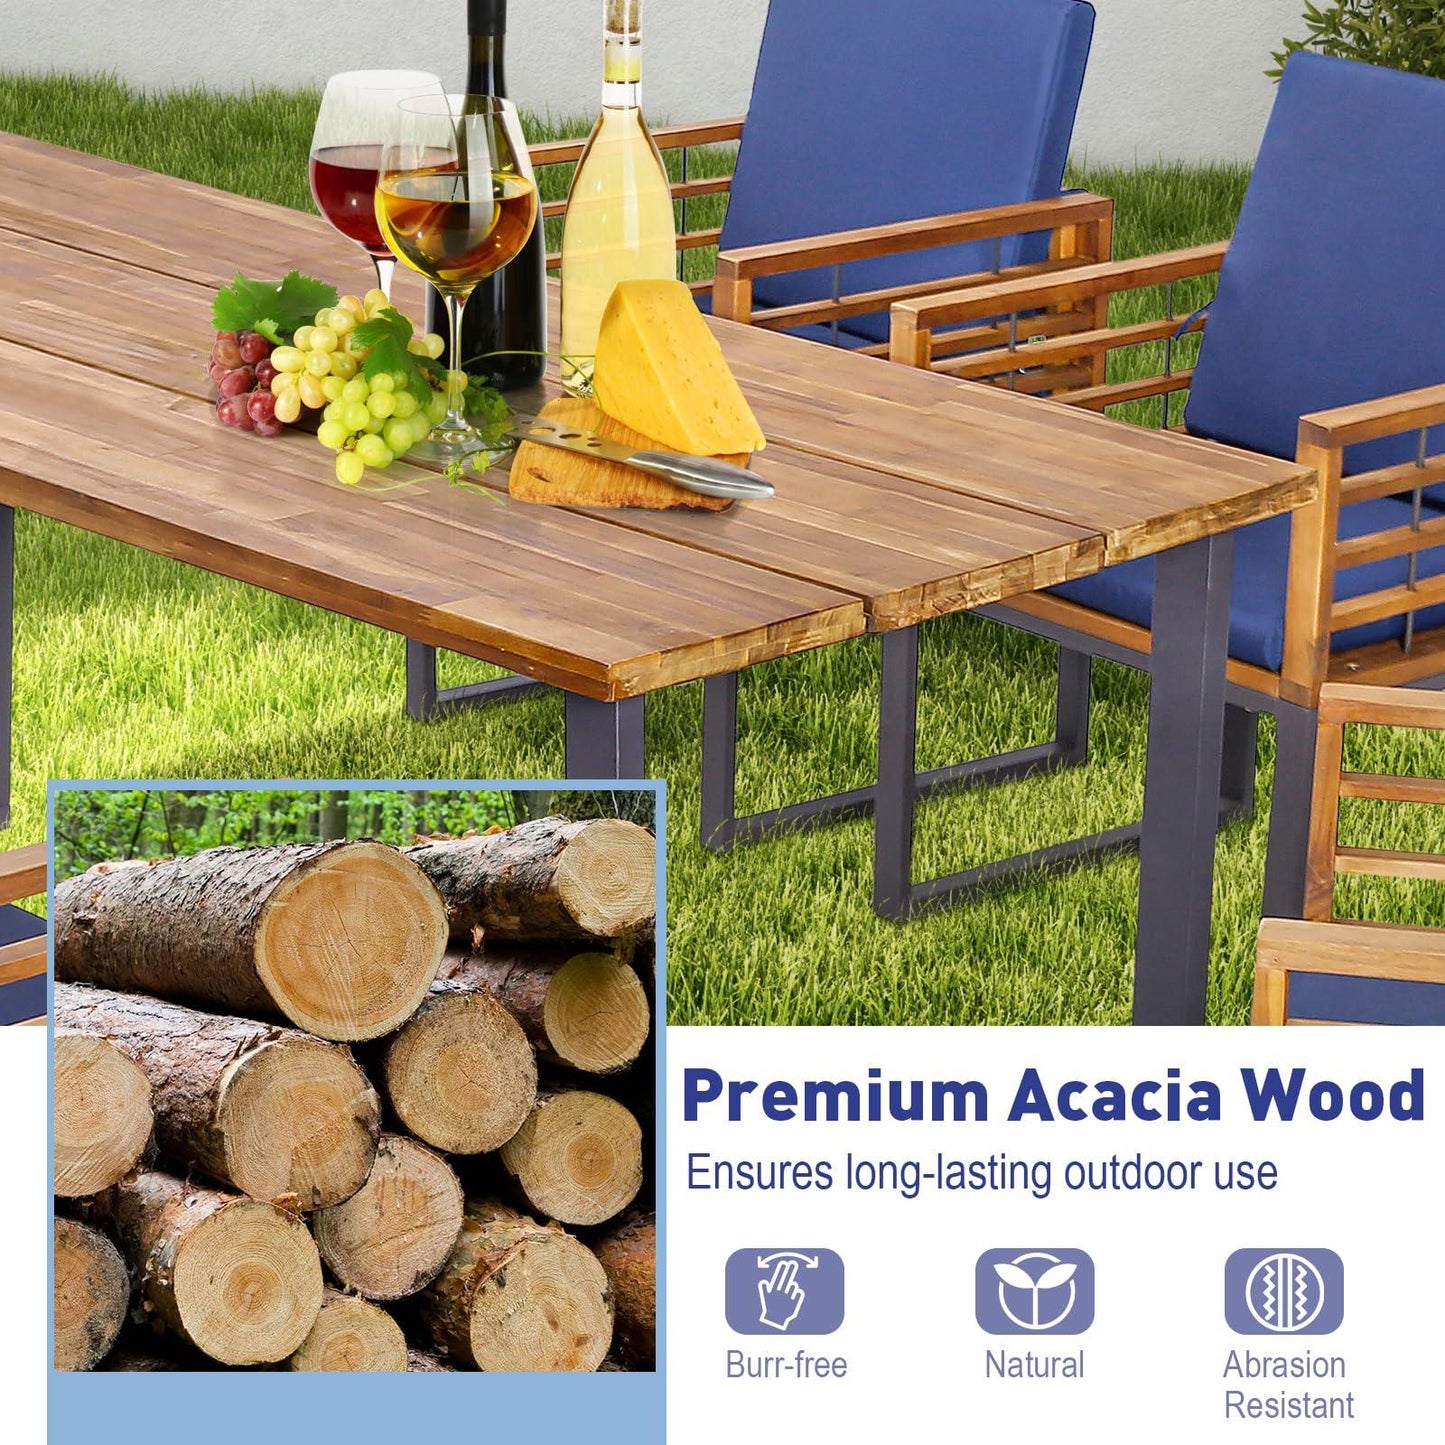 Tangkula 7 Piece Patio Dining Set, Acacia Wood Dining Chair & Table Set, 69” Spacious Tabletop with Umbrella Hole, Heavy-Duty Metal Support, Dining Set for Backyard, Poolside (Navy) - CookCave